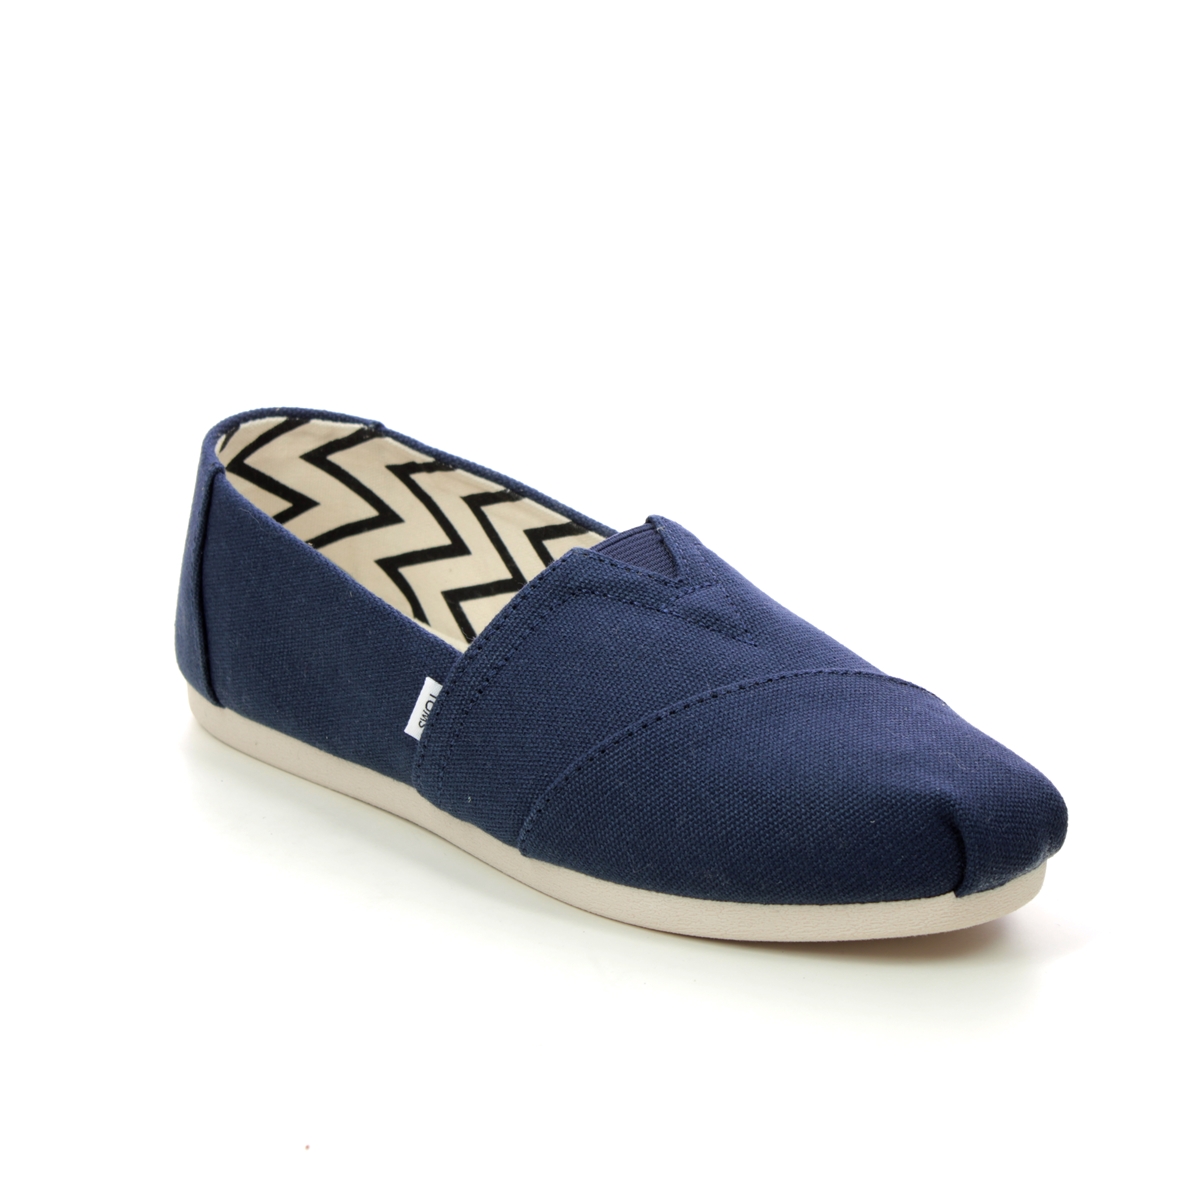 Toms Alpargata Classic Navy Womens Espadrilles 10017712-70 in a Plain Canvas in Size 7